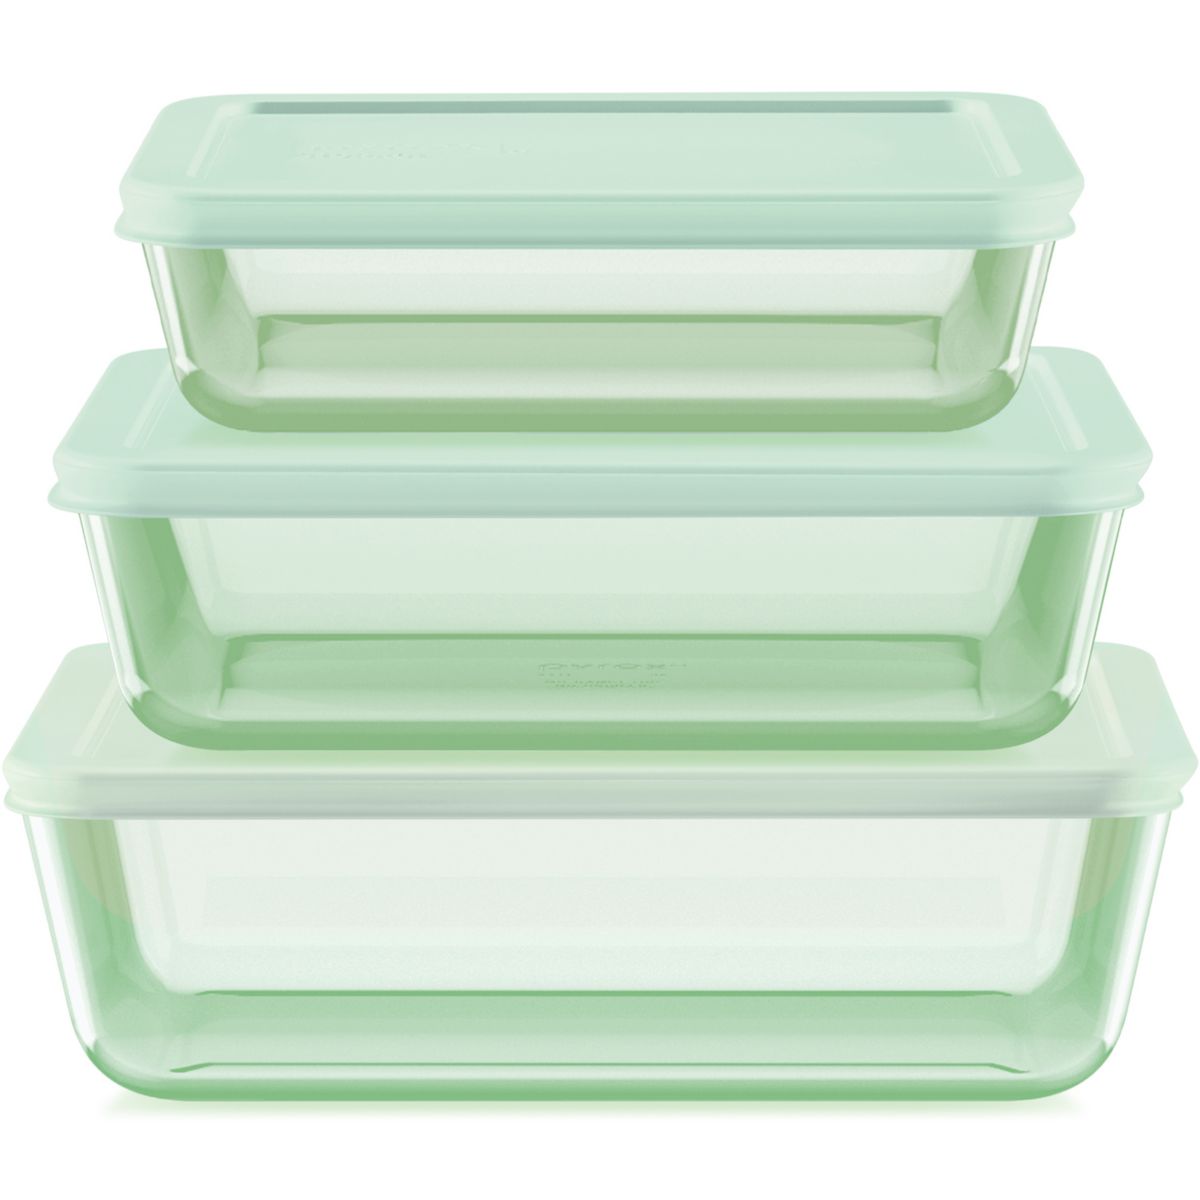 Pyrex Simply Store Green Tinted 6-piece Rectangle Food Storage Containers Set with Plastic Lids Pyrex